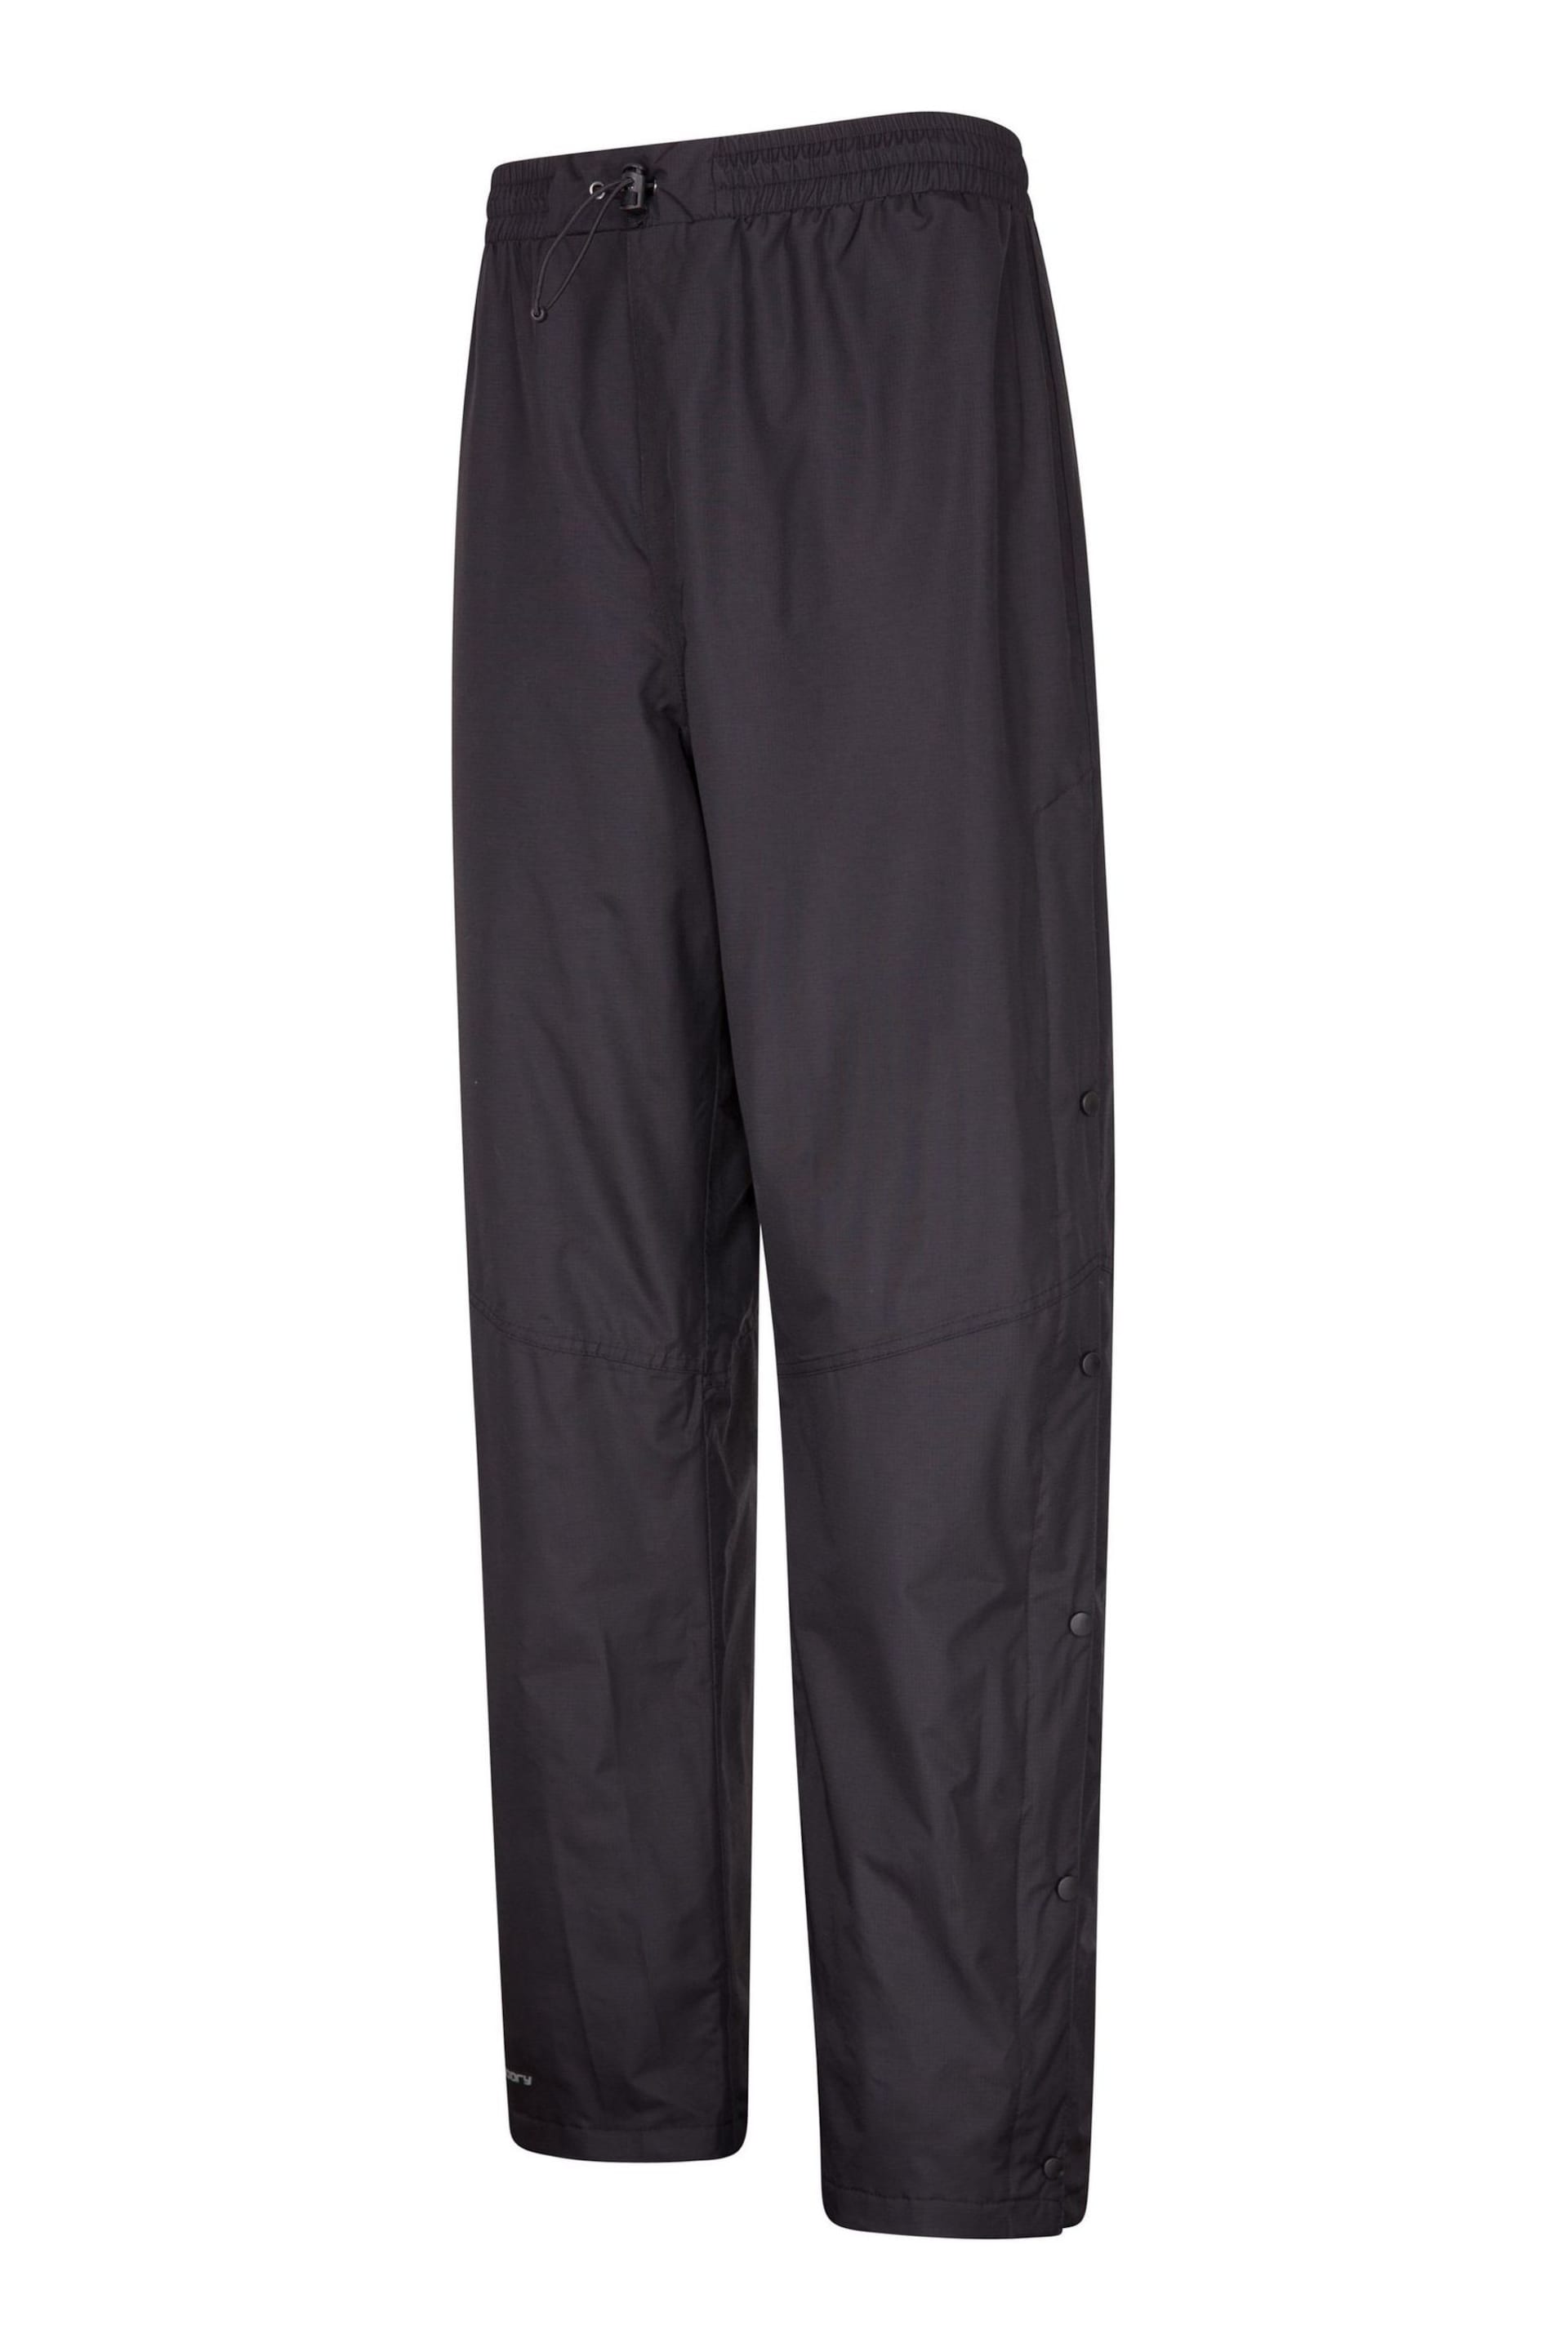 Mountain Warehouse Black Downpour Mens Waterproof Trousers - Image 3 of 5